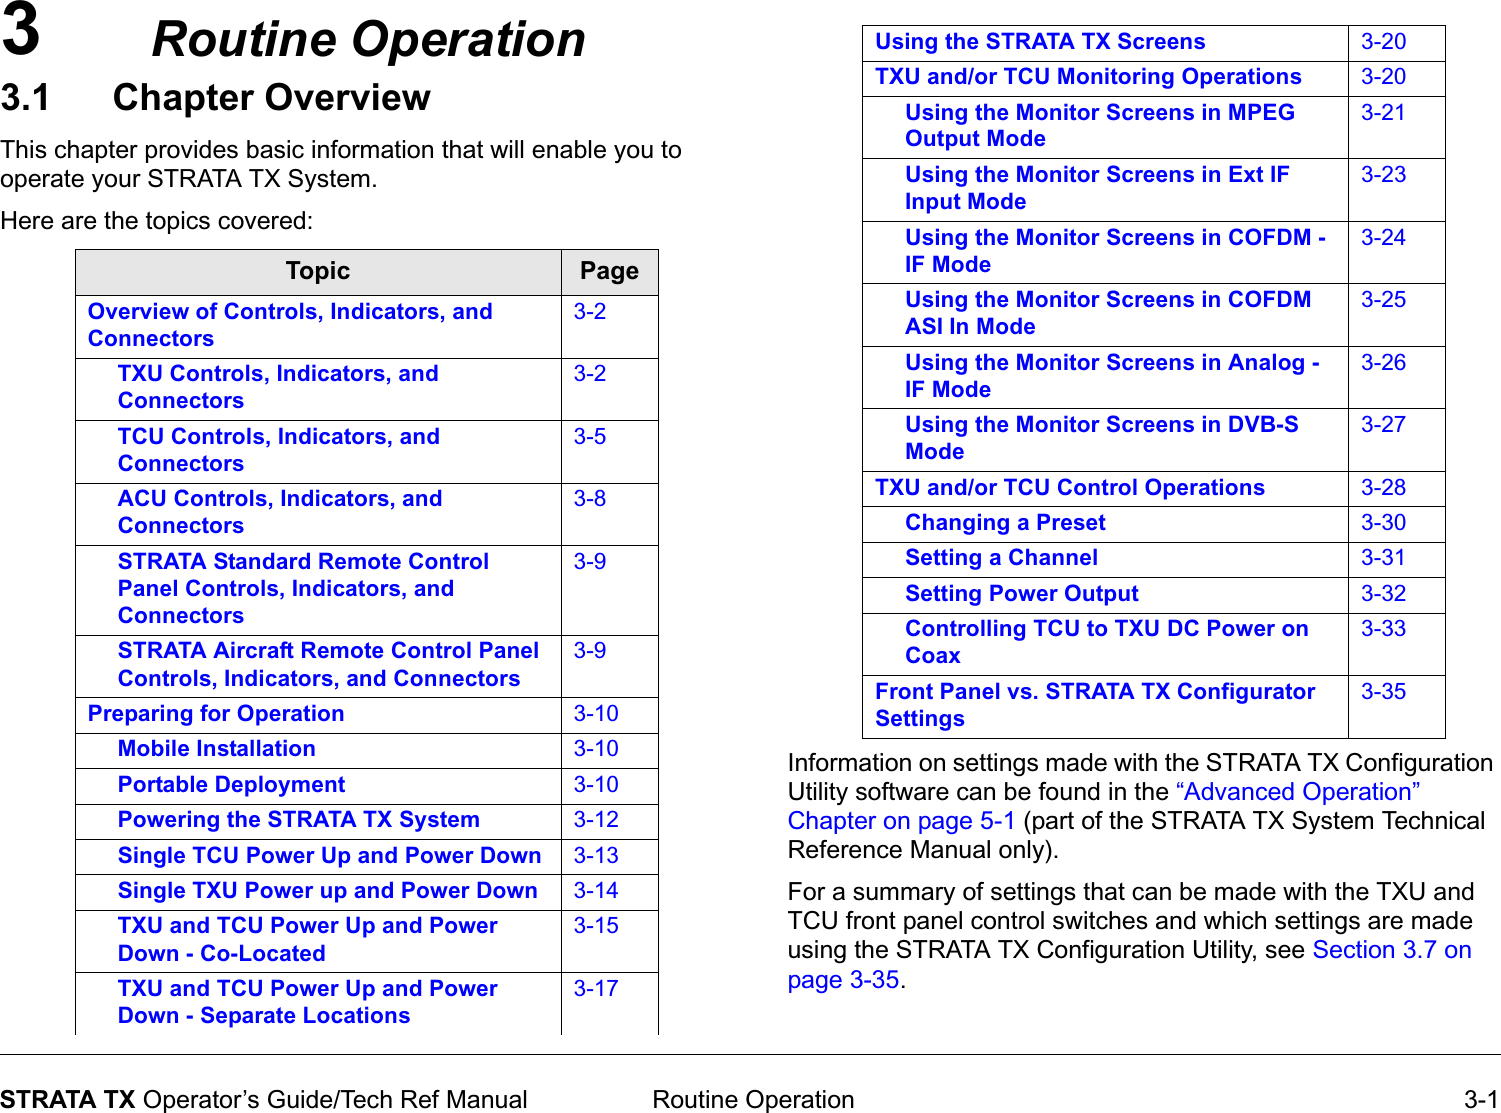 3 Routine Operation 3-1STRATA TX Operator’s Guide/Tech Ref ManualRoutine Operation3.1 Chapter OverviewThis chapter provides basic information that will enable you to operate your STRATA TX System. Here are the topics covered:  Topic PageOverview of Controls, Indicators, and Connectors3-2TXU Controls, Indicators, and Connectors3-2TCU Controls, Indicators, and Connectors3-5ACU Controls, Indicators, and Connectors3-8STRATA Standard Remote Control Panel Controls, Indicators, and Connectors3-9STRATA Aircraft Remote Control Panel Controls, Indicators, and Connectors3-9Preparing for Operation 3-10Mobile Installation 3-10Portable Deployment 3-10Powering the STRATA TX System 3-12Single TCU Power Up and Power Down 3-13Single TXU Power up and Power Down 3-14TXU and TCU Power Up and Power Down - Co-Located3-15TXU and TCU Power Up and Power Down - Separate Locations3-17Information on settings made with the STRATA TX Configuration Utility software can be found in the “Advanced Operation” Chapter on page 5-1 (part of the STRATA TX System Technical Reference Manual only). For a summary of settings that can be made with the TXU and TCU front panel control switches and which settings are made using the STRATA TX Configuration Utility, see Section 3.7 on page 3-35.Using the STRATA TX Screens 3-20TXU and/or TCU Monitoring Operations 3-20Using the Monitor Screens in MPEG Output Mode3-21Using the Monitor Screens in Ext IF Input Mode3-23Using the Monitor Screens in COFDM - IF Mode3-24Using the Monitor Screens in COFDM ASI In Mode3-25Using the Monitor Screens in Analog - IF Mode3-26Using the Monitor Screens in DVB-S Mode3-27TXU and/or TCU Control Operations 3-28Changing a Preset 3-30Setting a Channel 3-31Setting Power Output 3-32Controlling TCU to TXU DC Power on Coax3-33Front Panel vs. STRATA TX Configurator Settings3-35